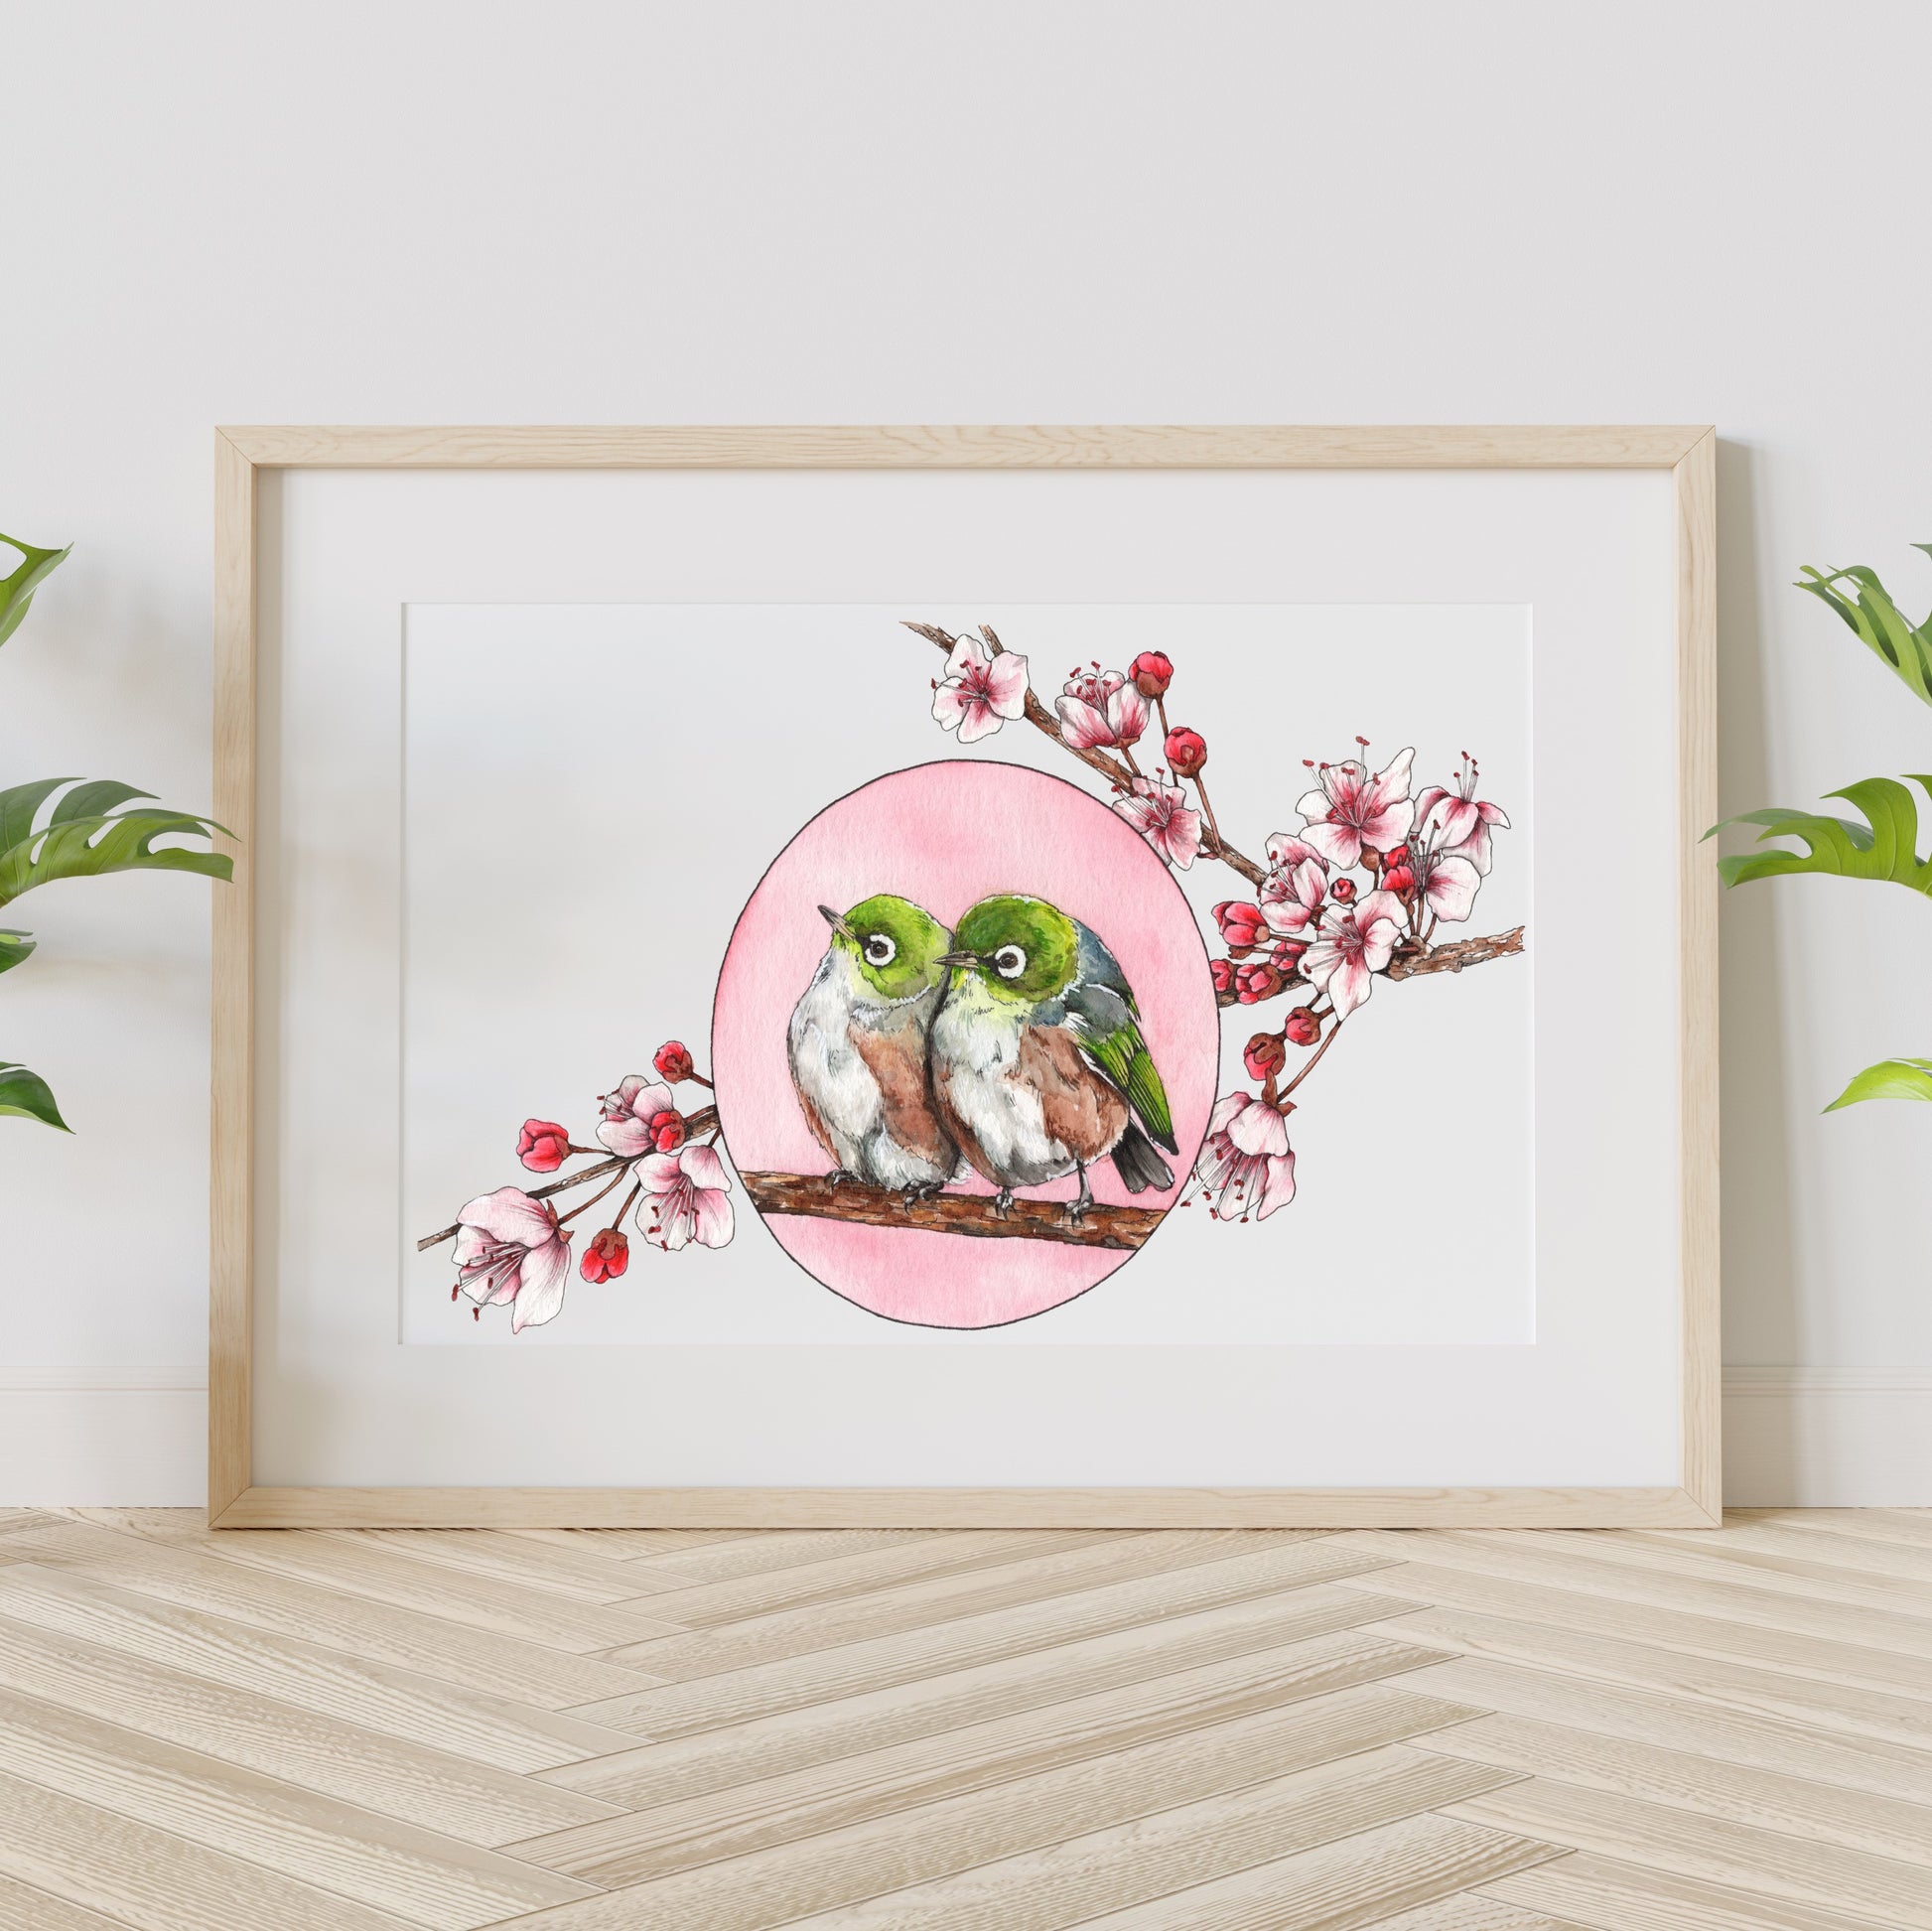 Artwork featuring 2 Waxeye birds on a branch with pink blossoms surrounding them.